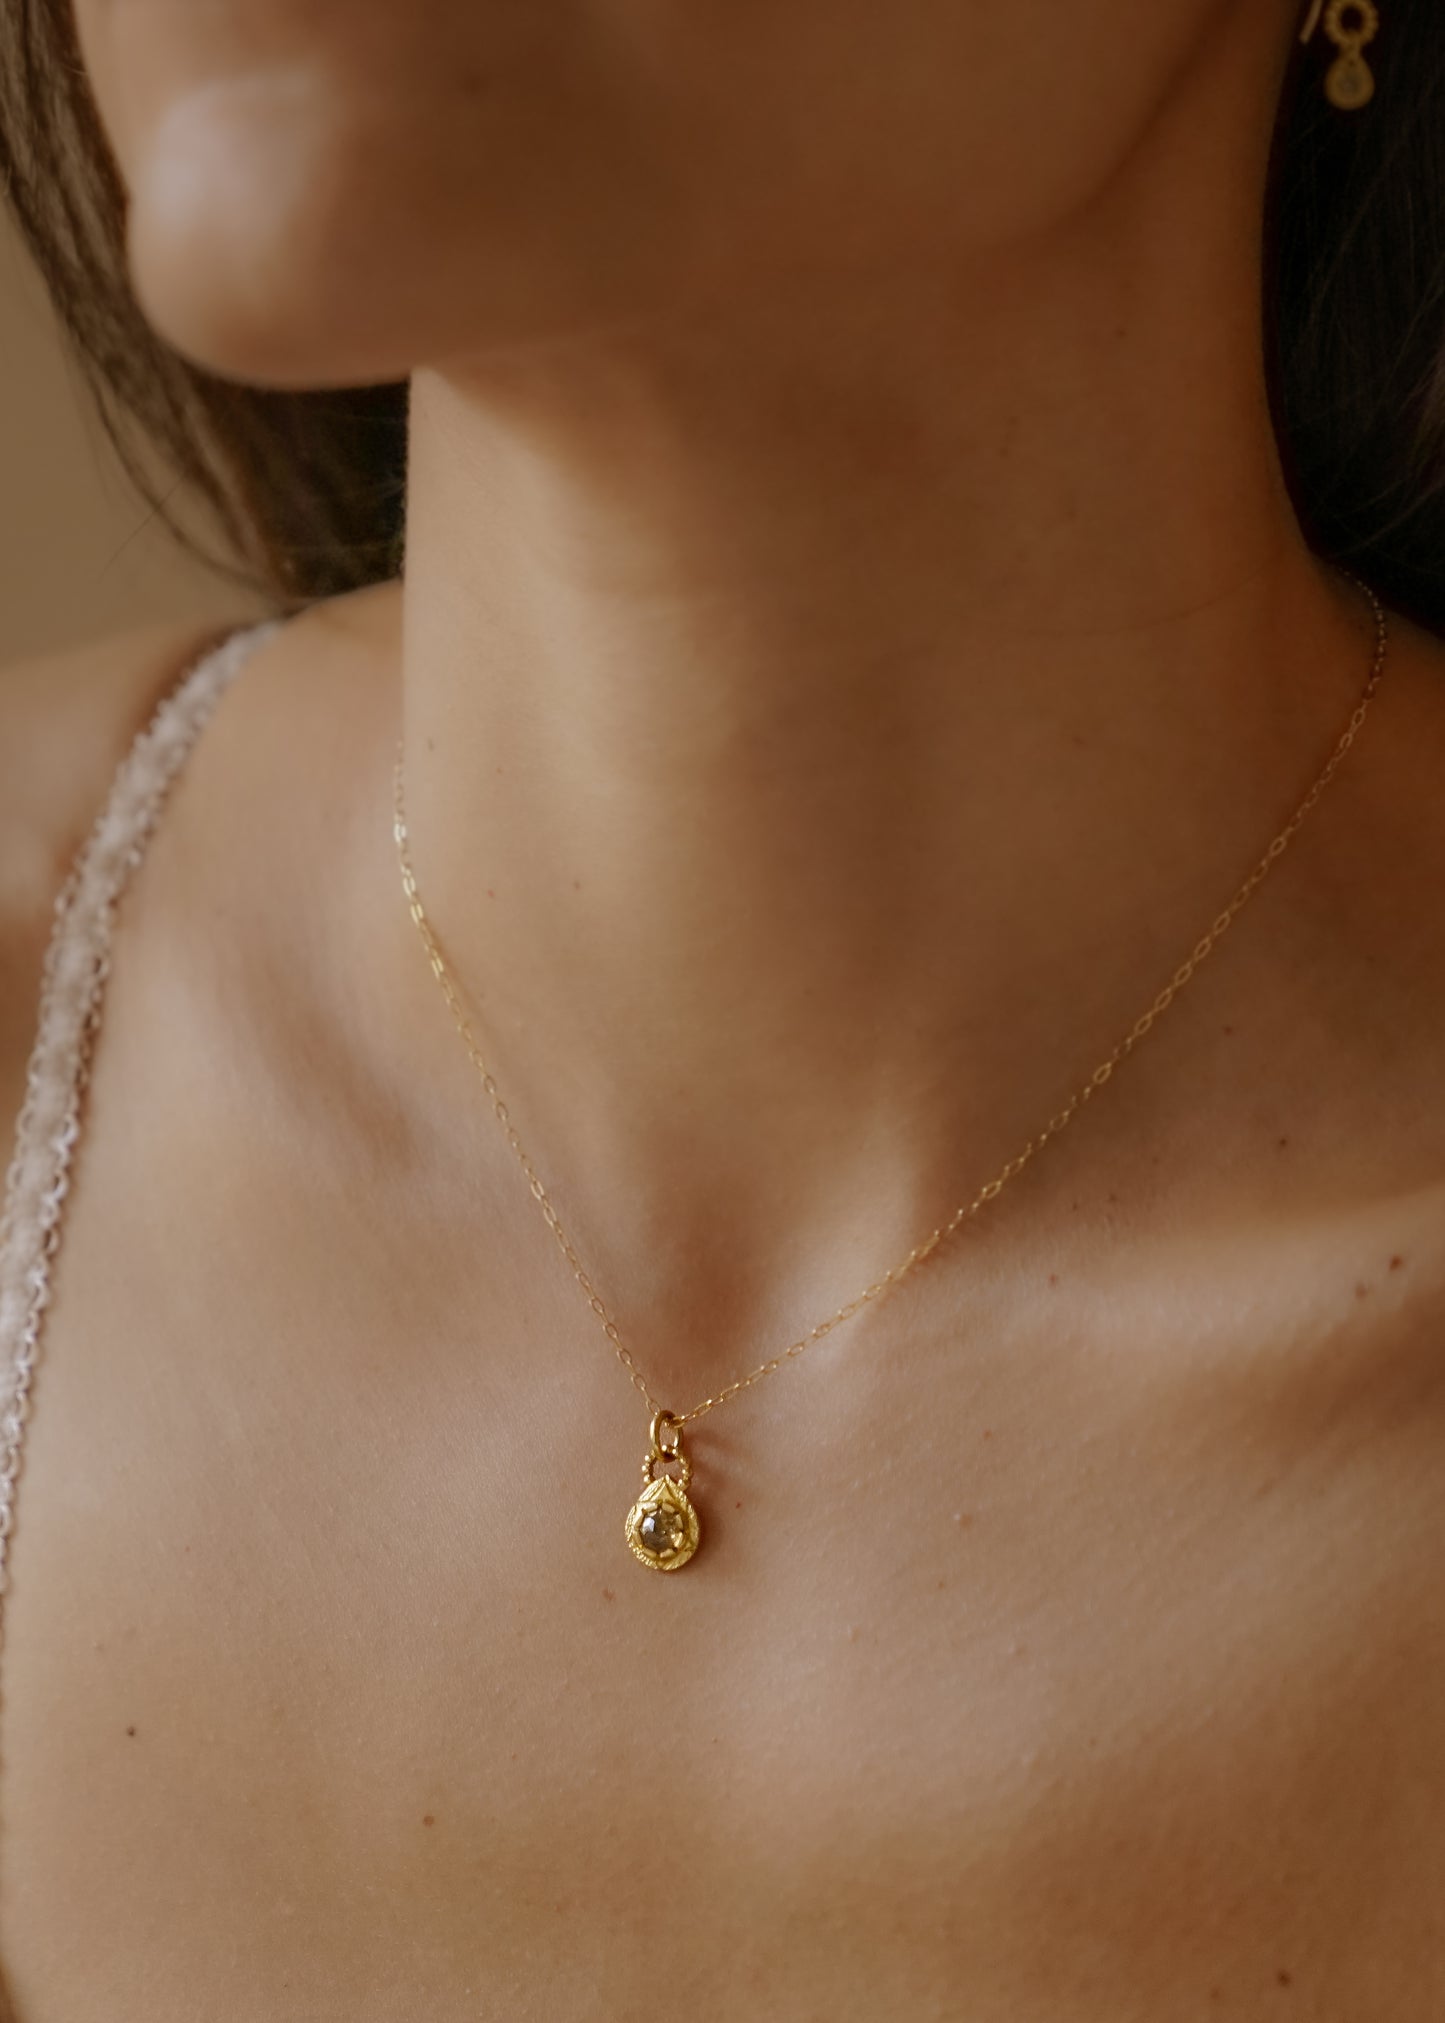 The Solo necklace revels in its unencumbered beauty. A stunning rose cut diamond is cradled in a gold droplet, revealing delicate texture and detail. An intricate beaded arch balances the pendant, linking it to its chain while showcasing its ornate character. 